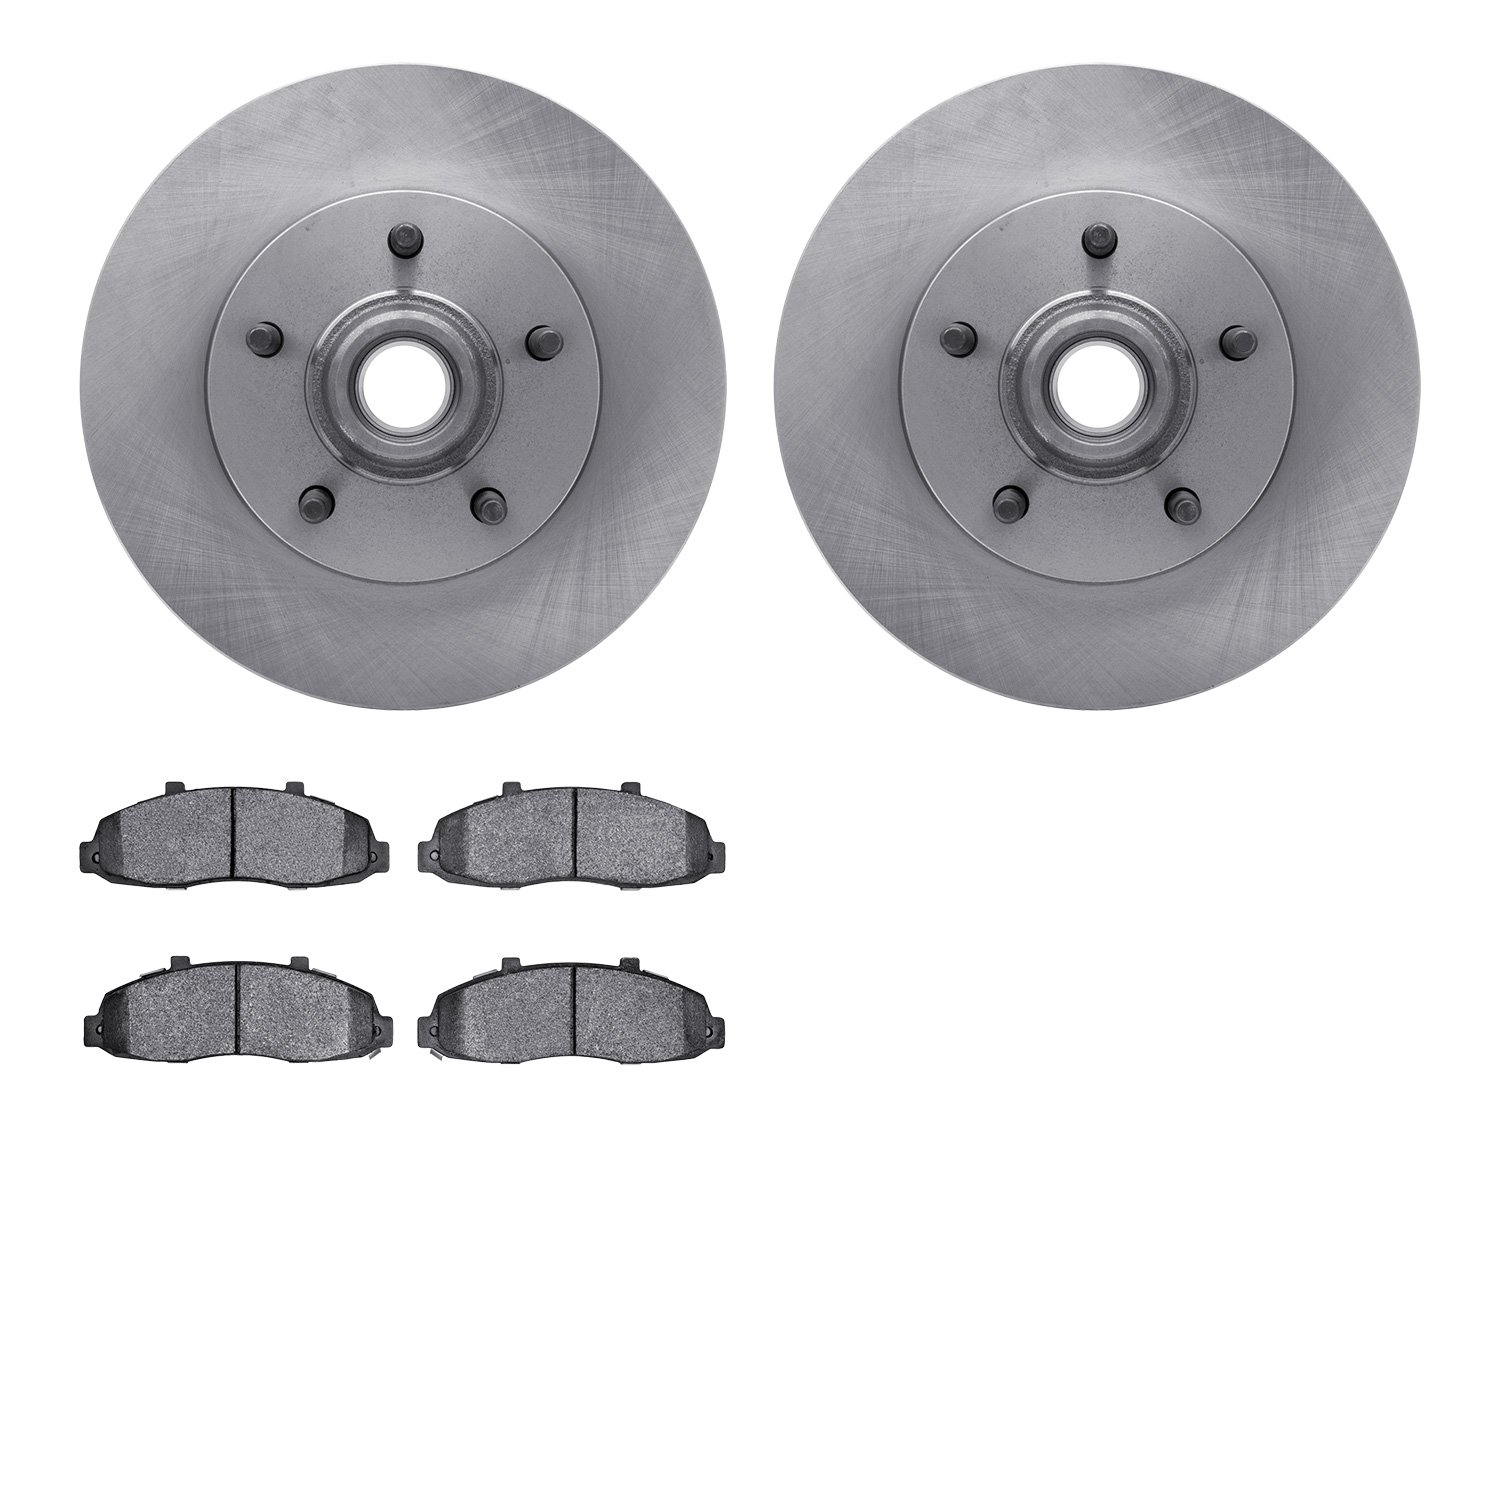 6402-54164 Brake Rotors with Ultimate-Duty Brake Pads, 2000-2004 Ford/Lincoln/Mercury/Mazda, Position: Front